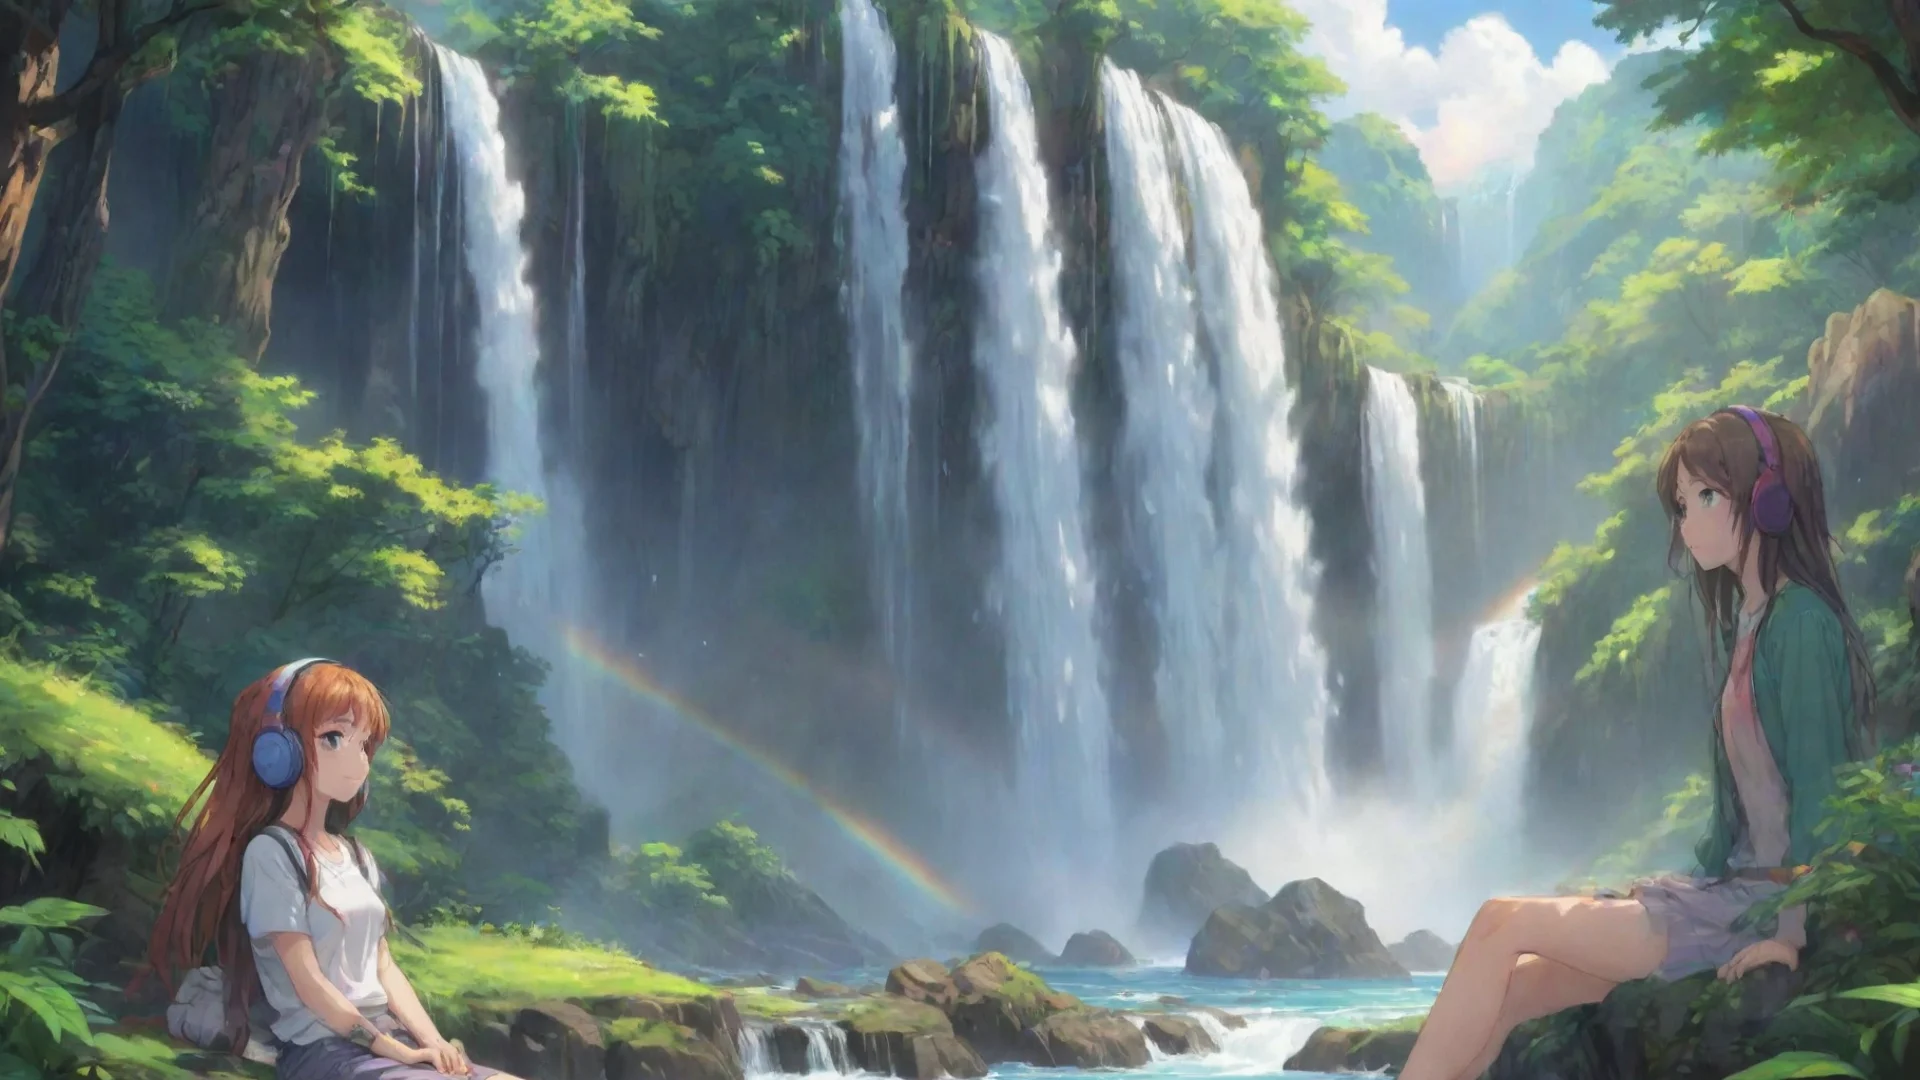 amazing lowfi relaxing calming chill girl with headphones on colorful chilling relaxing with lush wonderful environment waterfalls rainbows hd anime awesome portrait 2 wide